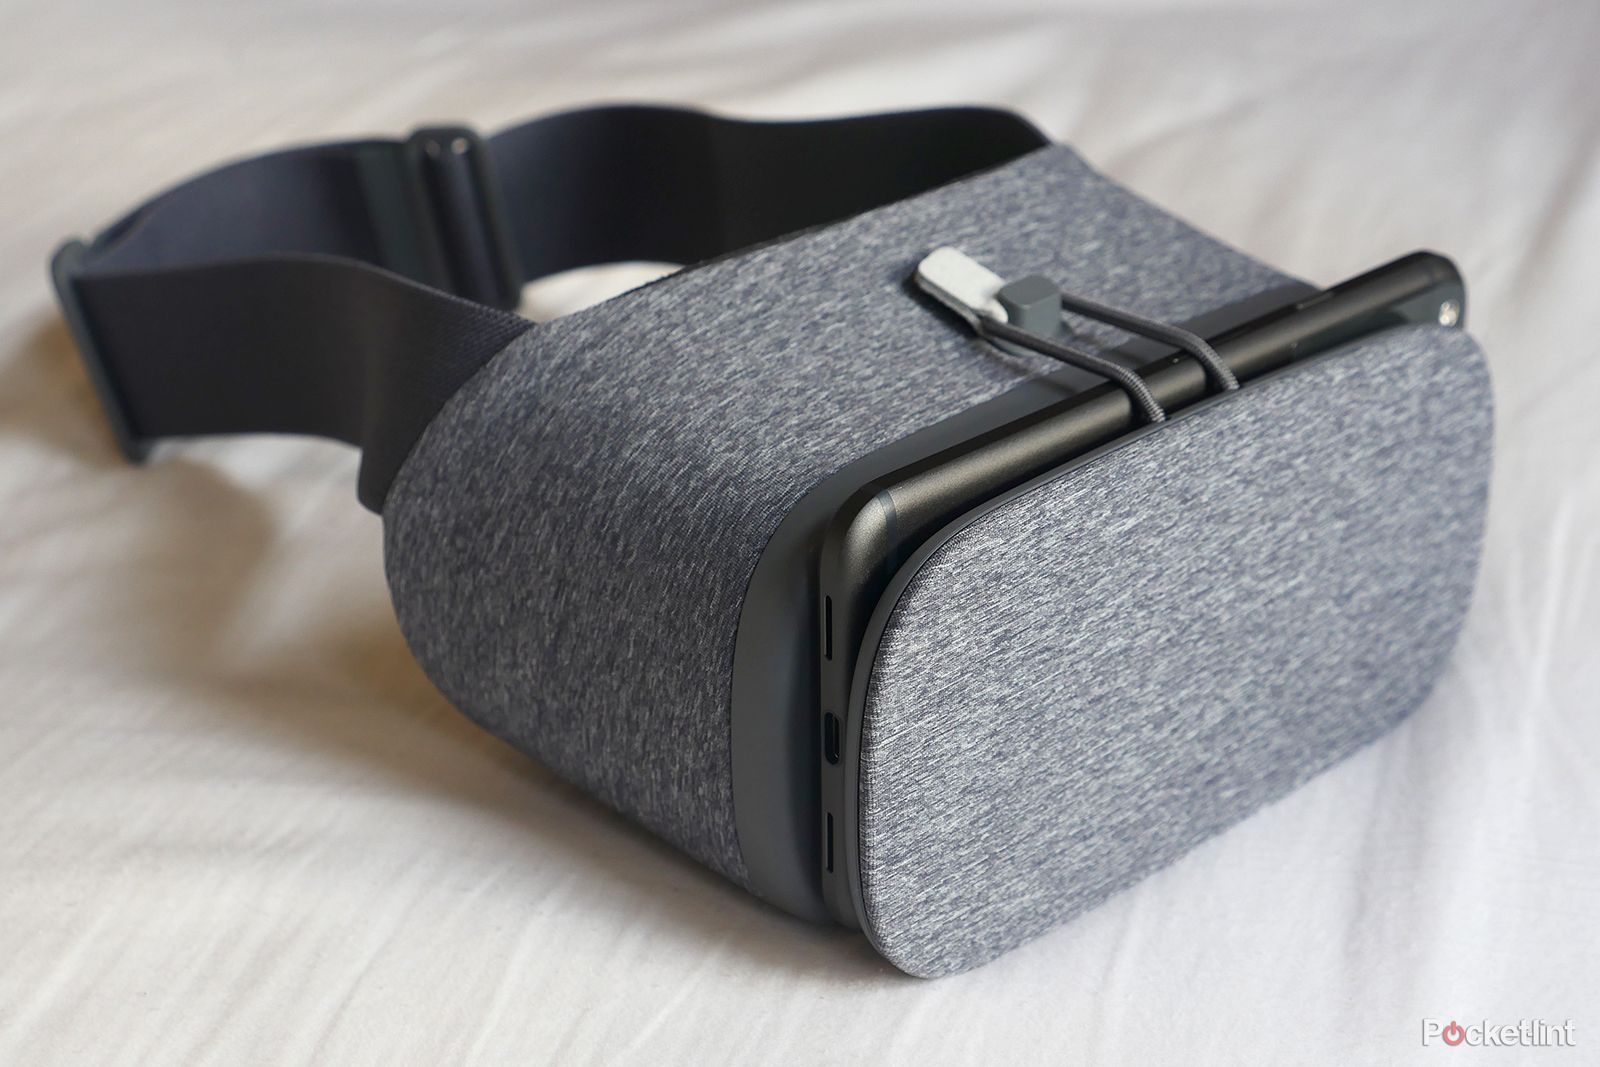 htc vive s vr headset designer is now working on google daydream image 1